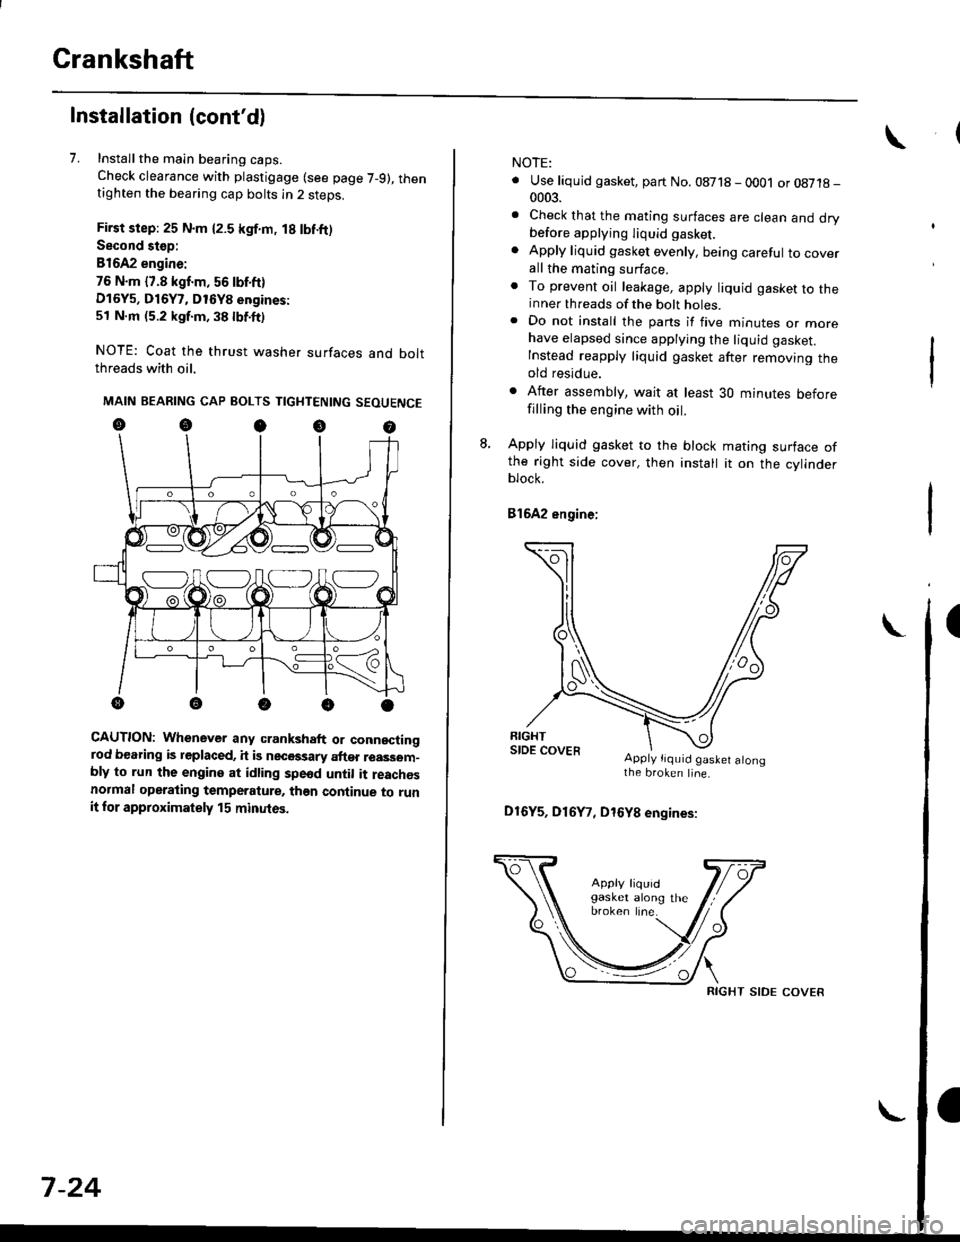 HONDA CIVIC 1998 6.G Workshop Manual Crankshaft
Installation (contd)
7. Installthe main bearing caps.
Check clearance with plastigage (see page 7-9), thentighten the bearing cap bolts in 2 steps.
First step: 25 N.m {2.5 kgf.m, 18 lbf.ft